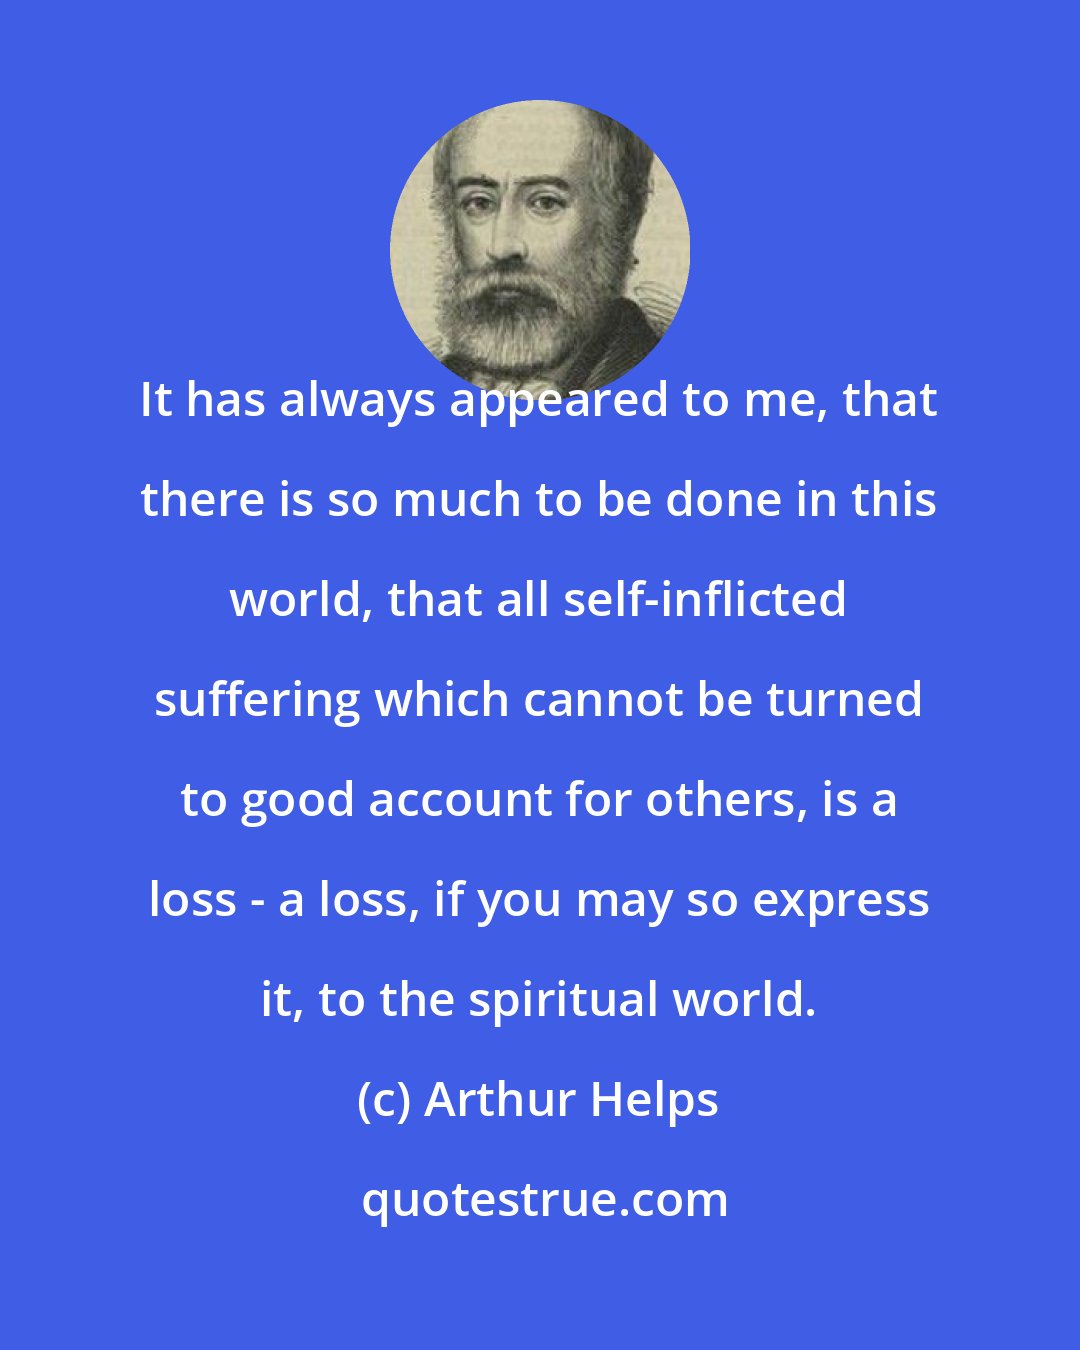 Arthur Helps: It has always appeared to me, that there is so much to be done in this world, that all self-inflicted suffering which cannot be turned to good account for others, is a loss - a loss, if you may so express it, to the spiritual world.